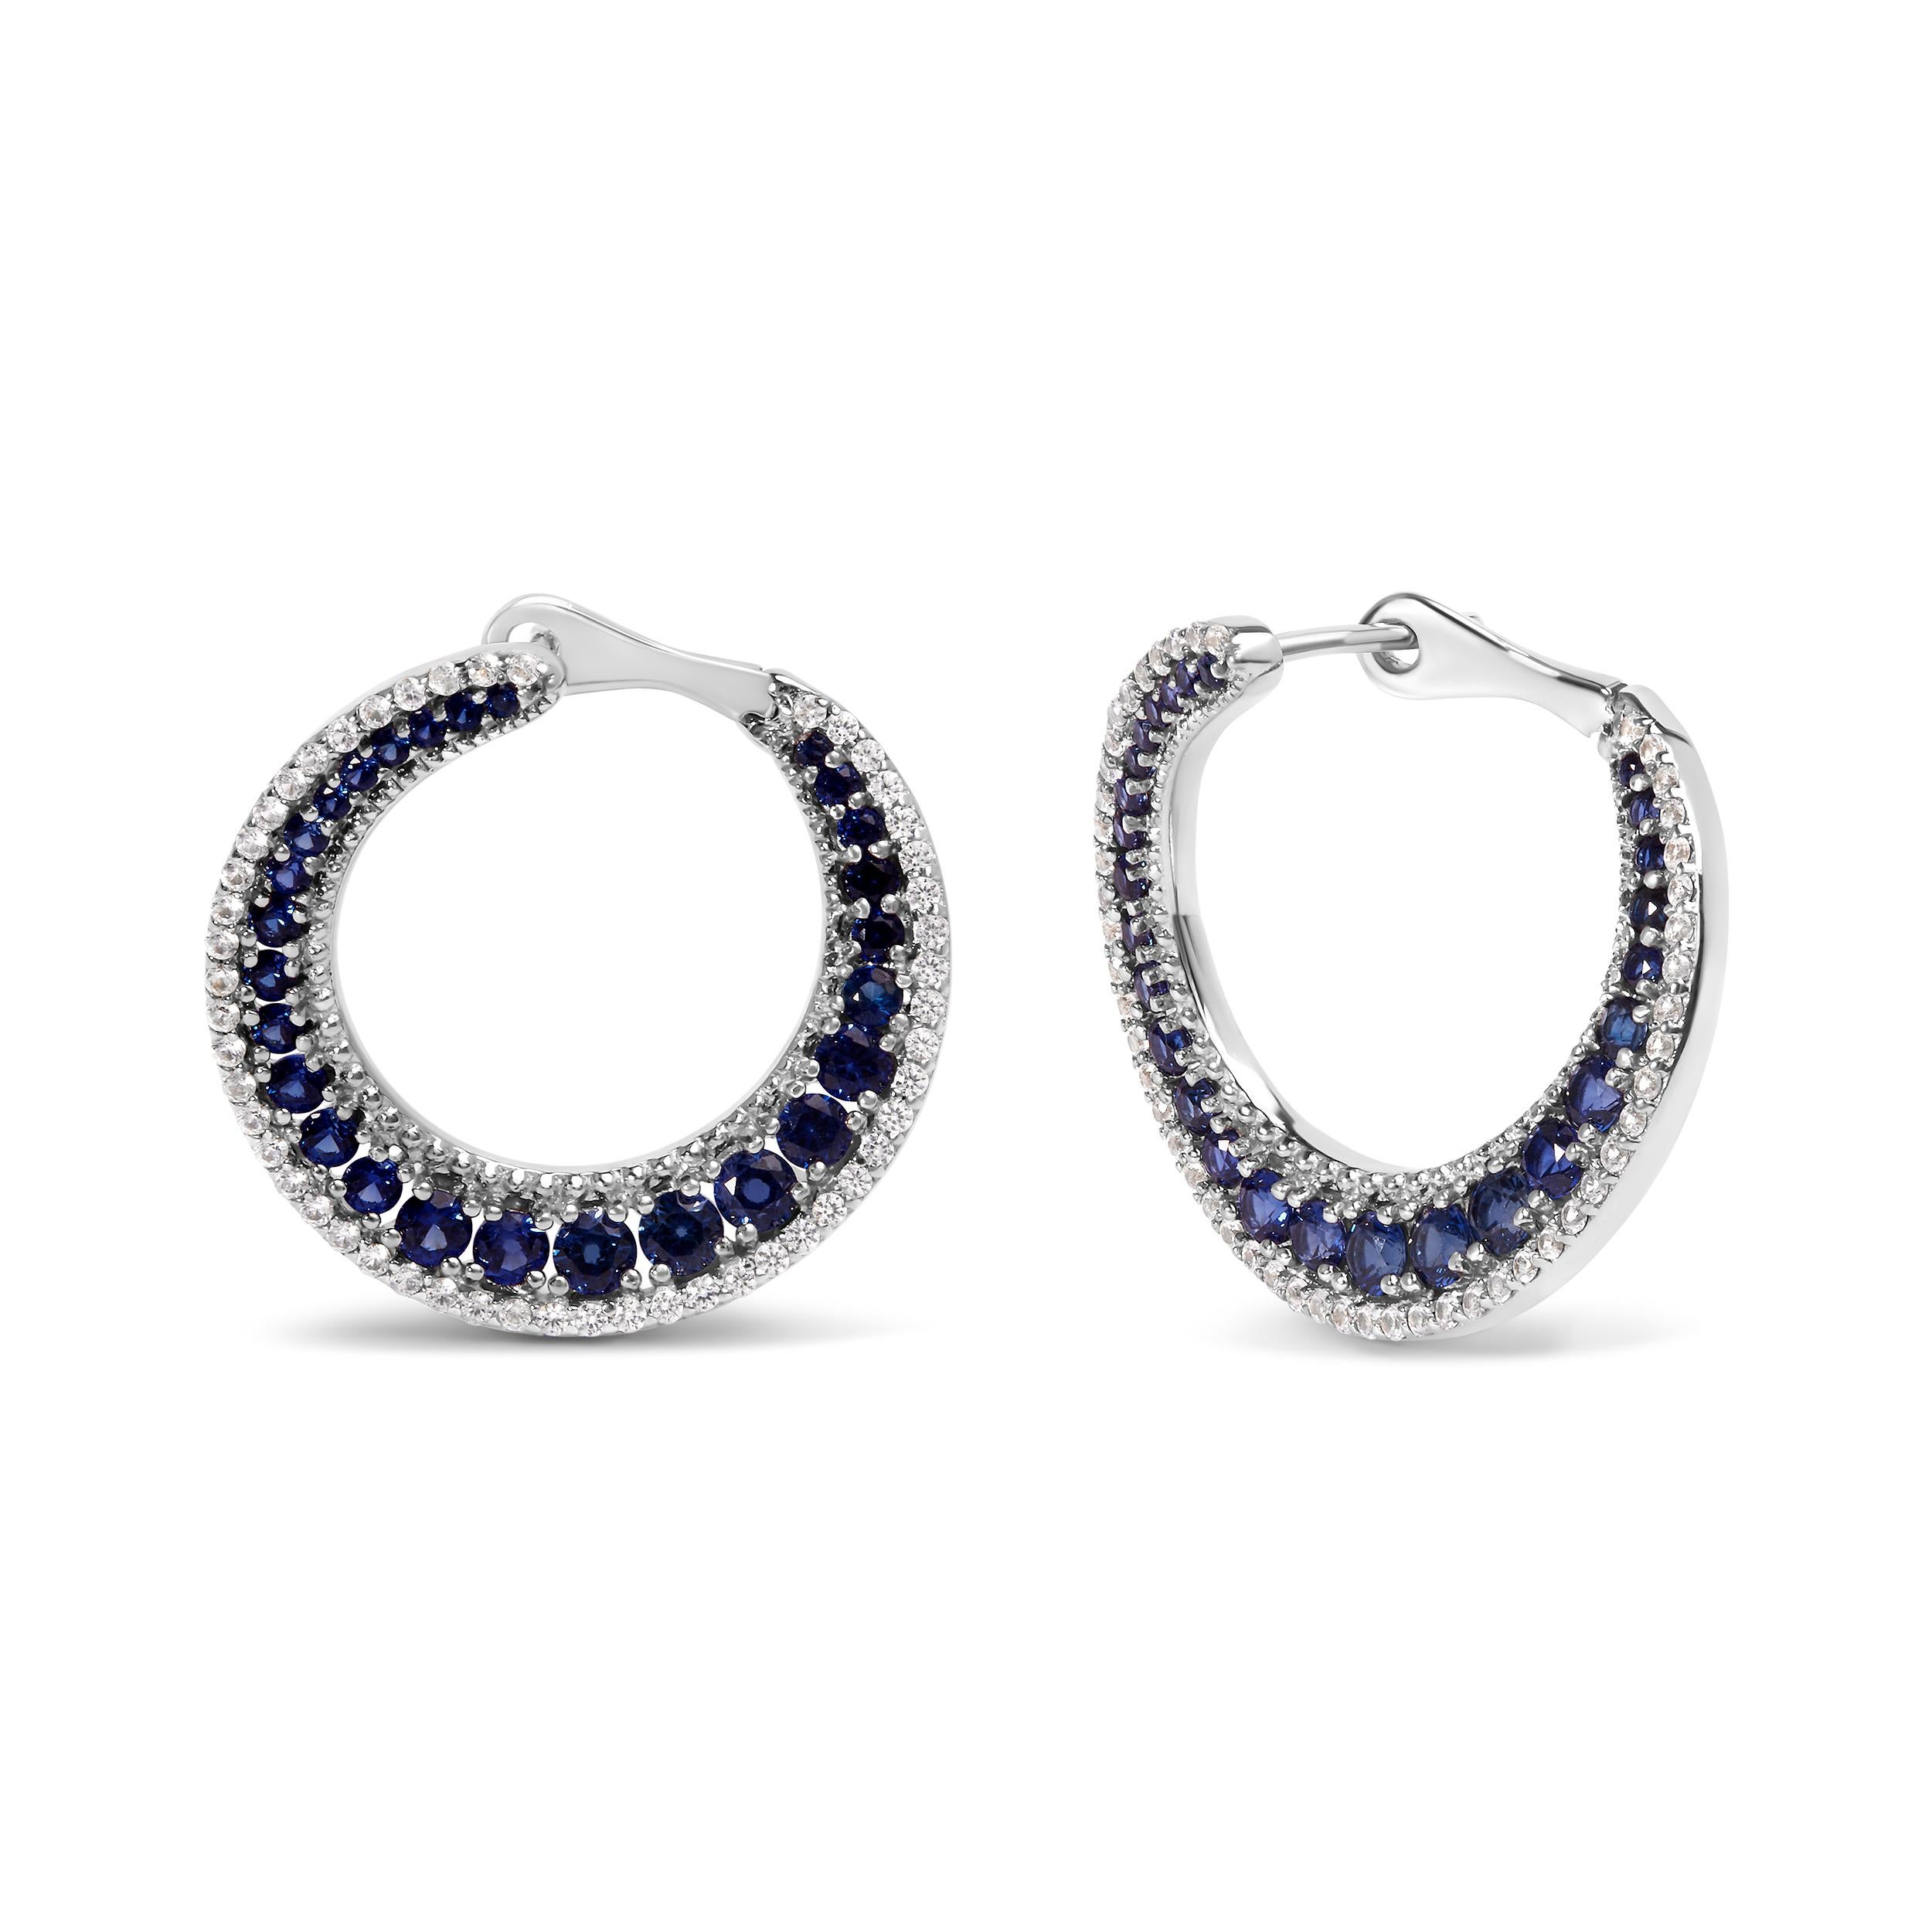 Introducing a celestial masterpiece that will make you shine like the moonlit sky! These exquisite .925 Sterling Silver Hoop Earrings are adorned with a mesmerizing array of 156 round Lab Created Blue Sapphires. Each gemstone is carefully set in a